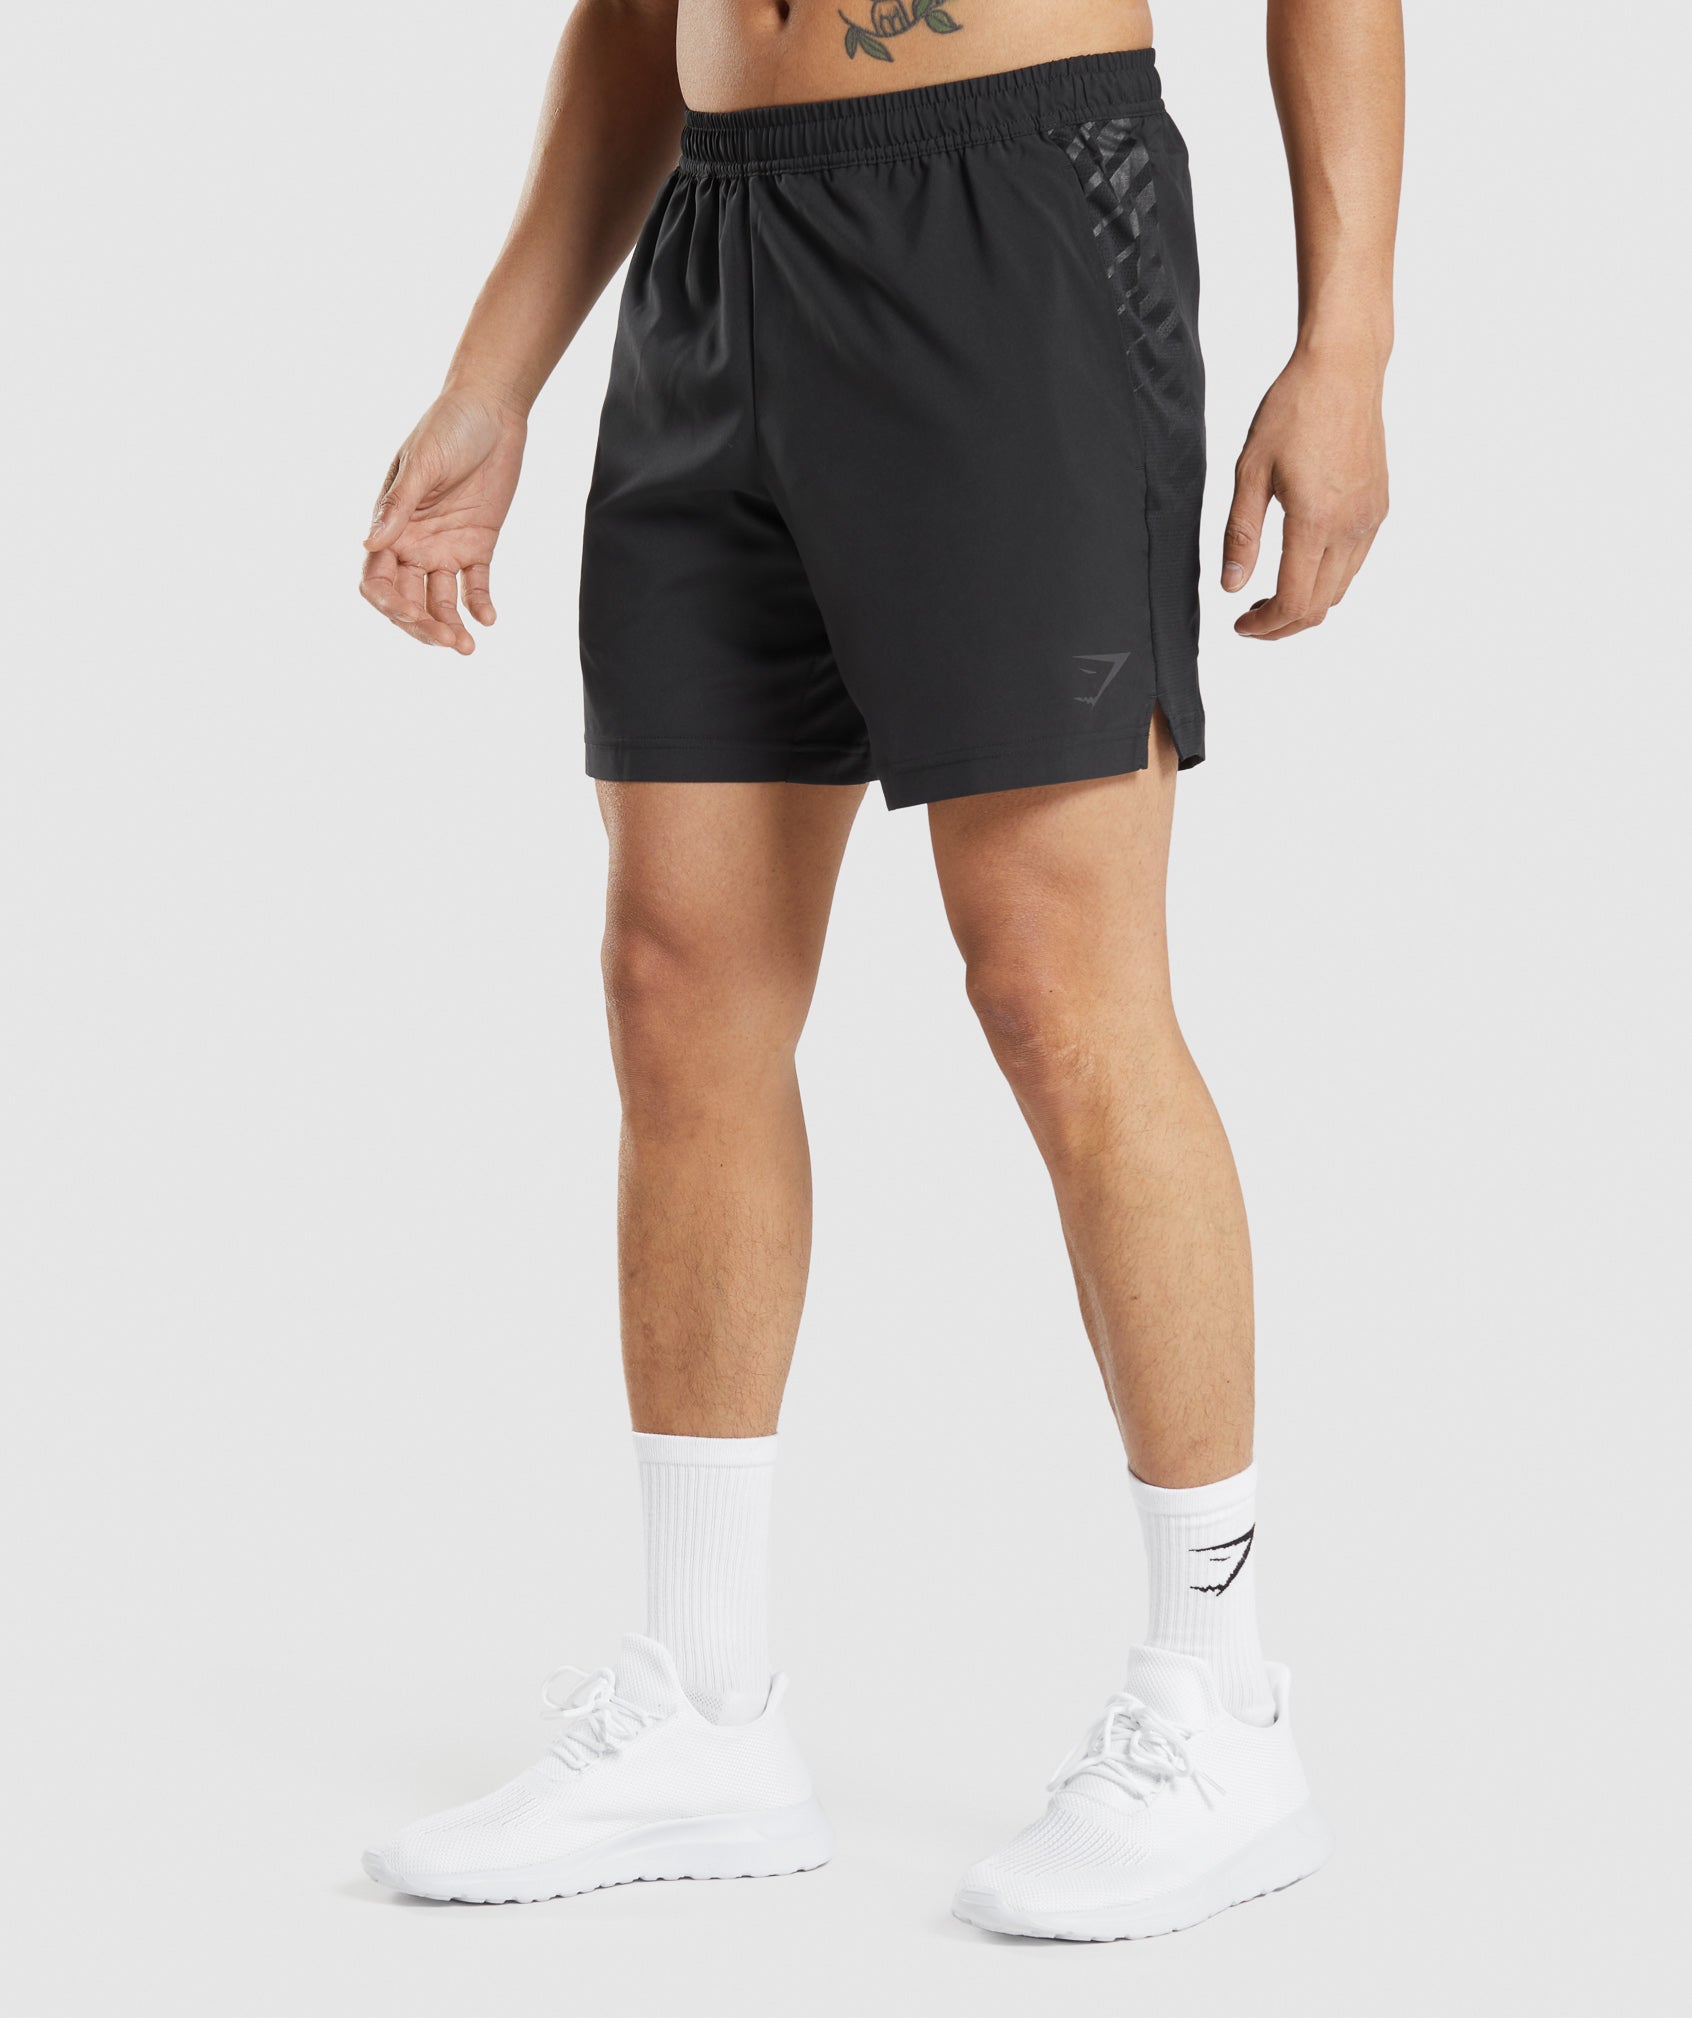 Sport Stripe 7" Shorts in Black is out of stock